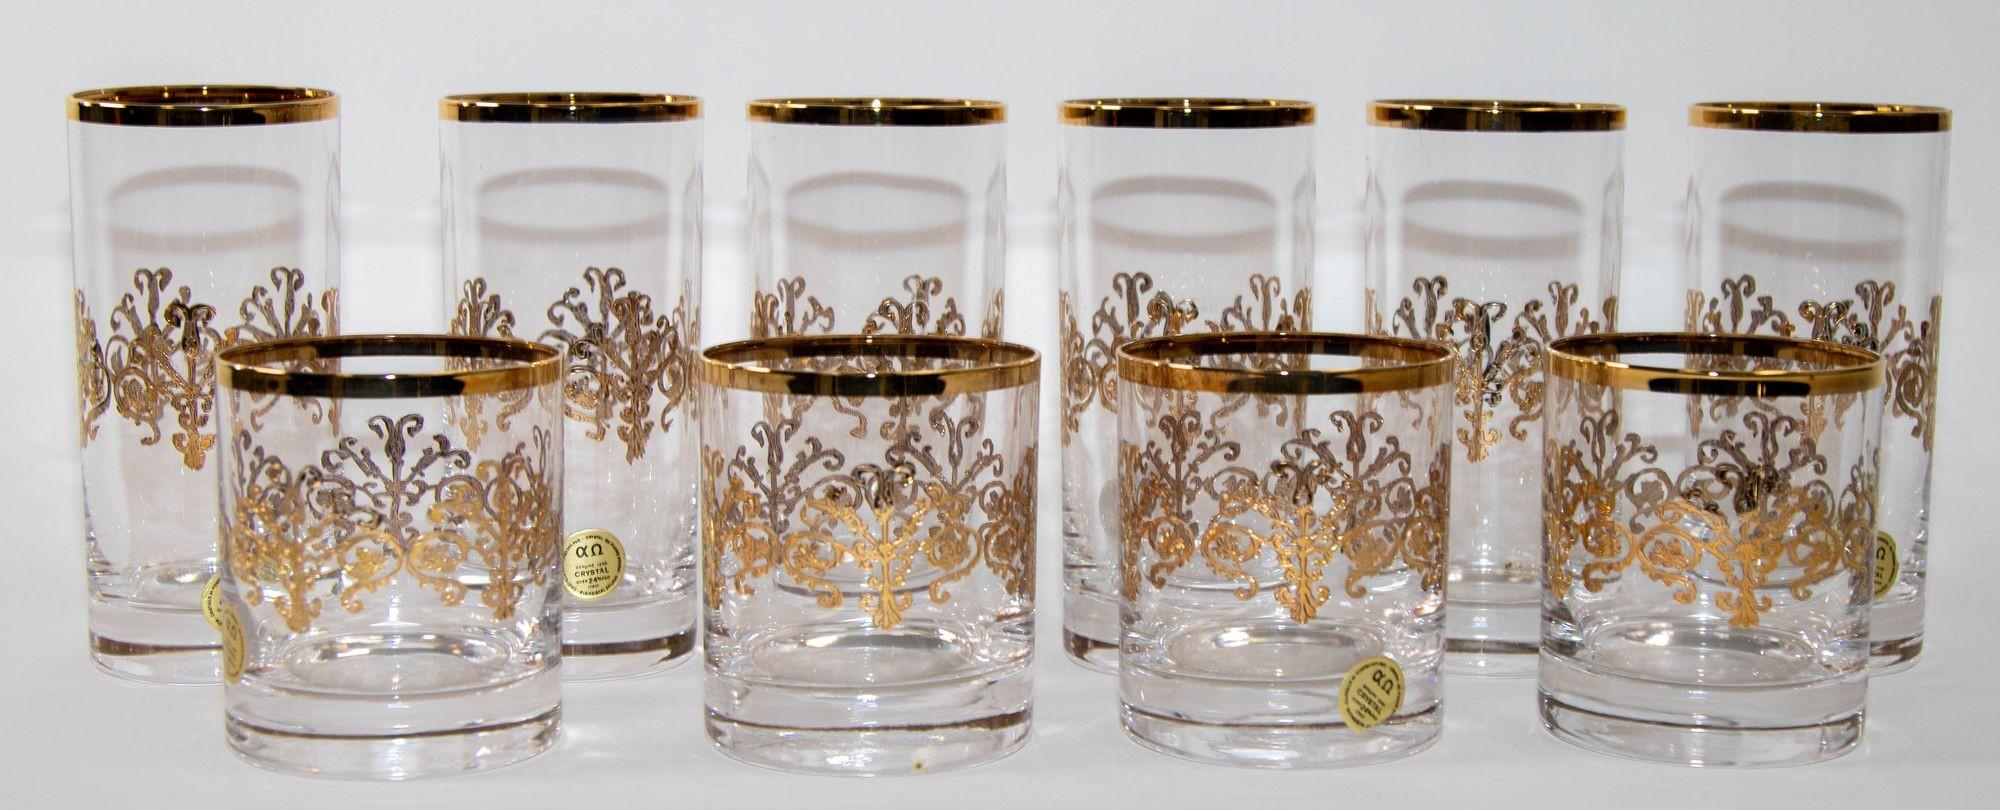 Murano Alfa & Omega Crystal Drinking Glasses set of 10 Luxury Barware 24 Kt Gold.
Gold leaf crystal barware glasses by Alfa and Omega Murano, Venice, Italy.
Murano Alfa and Omega Glasses Italian Barware Lot of 6 Tumblers and 4 whisky Glasses.
Murano